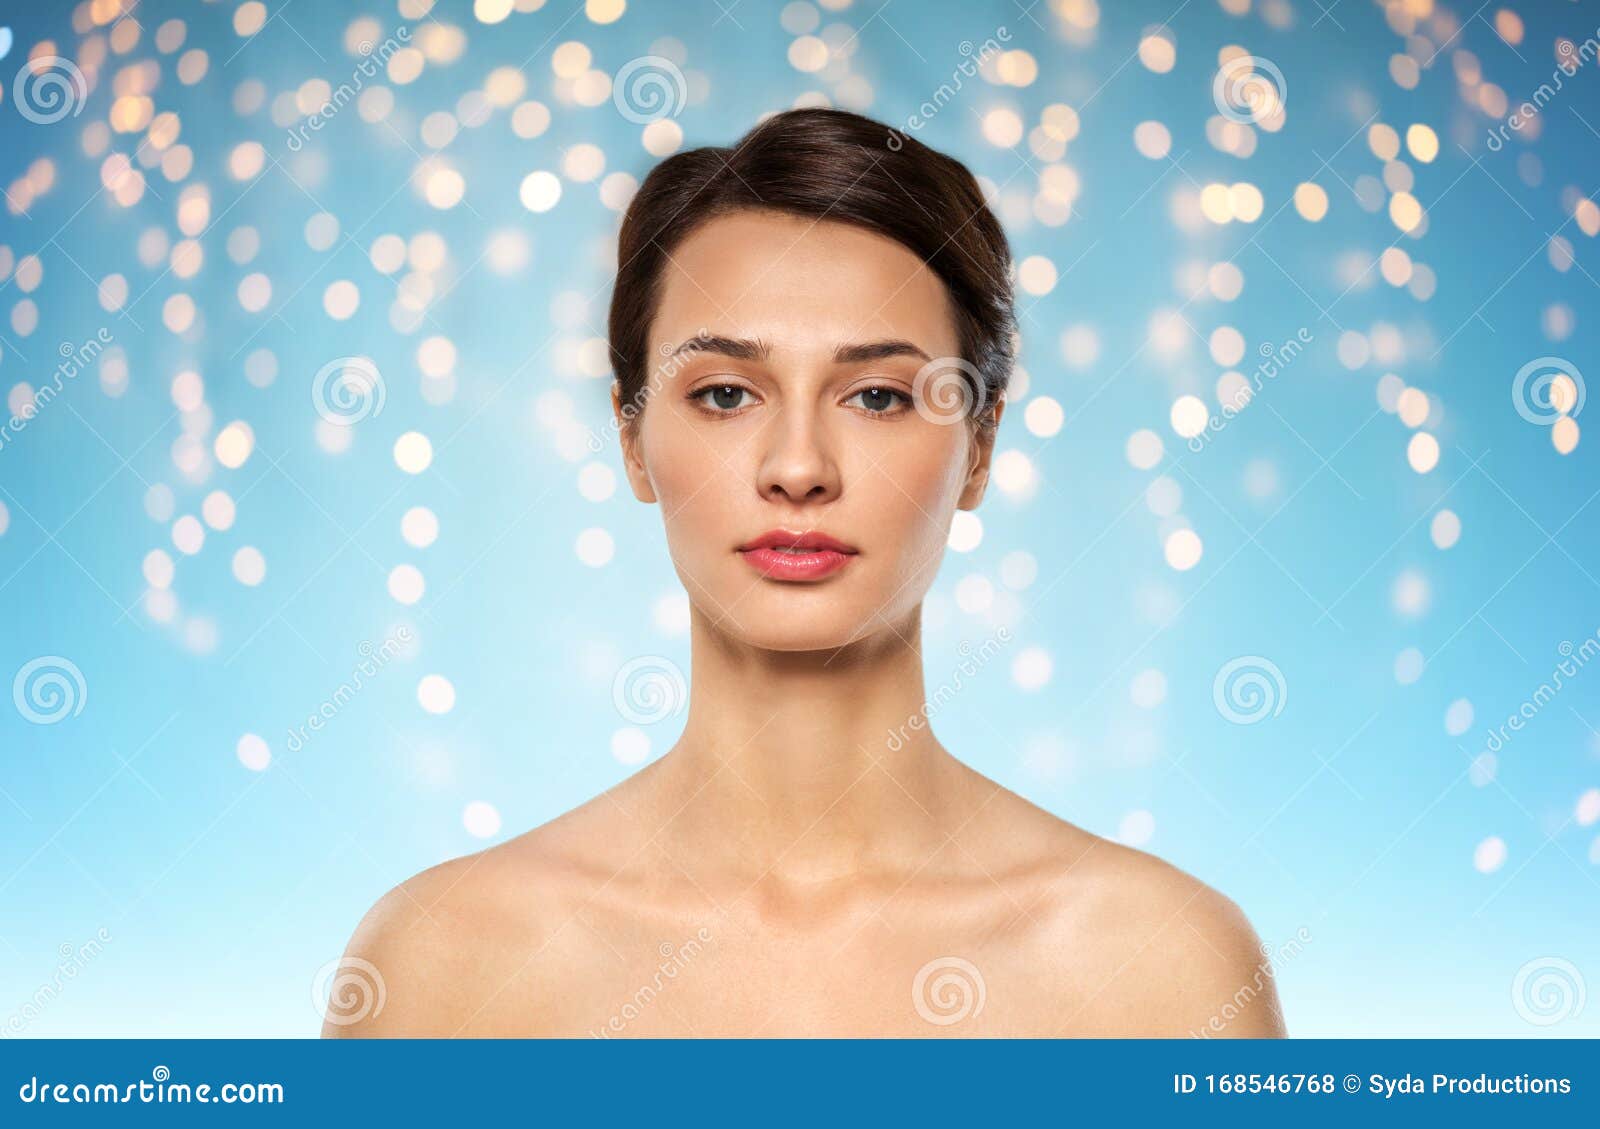 Young Woman Looking Over Her Shoulder Stock Image - Image 